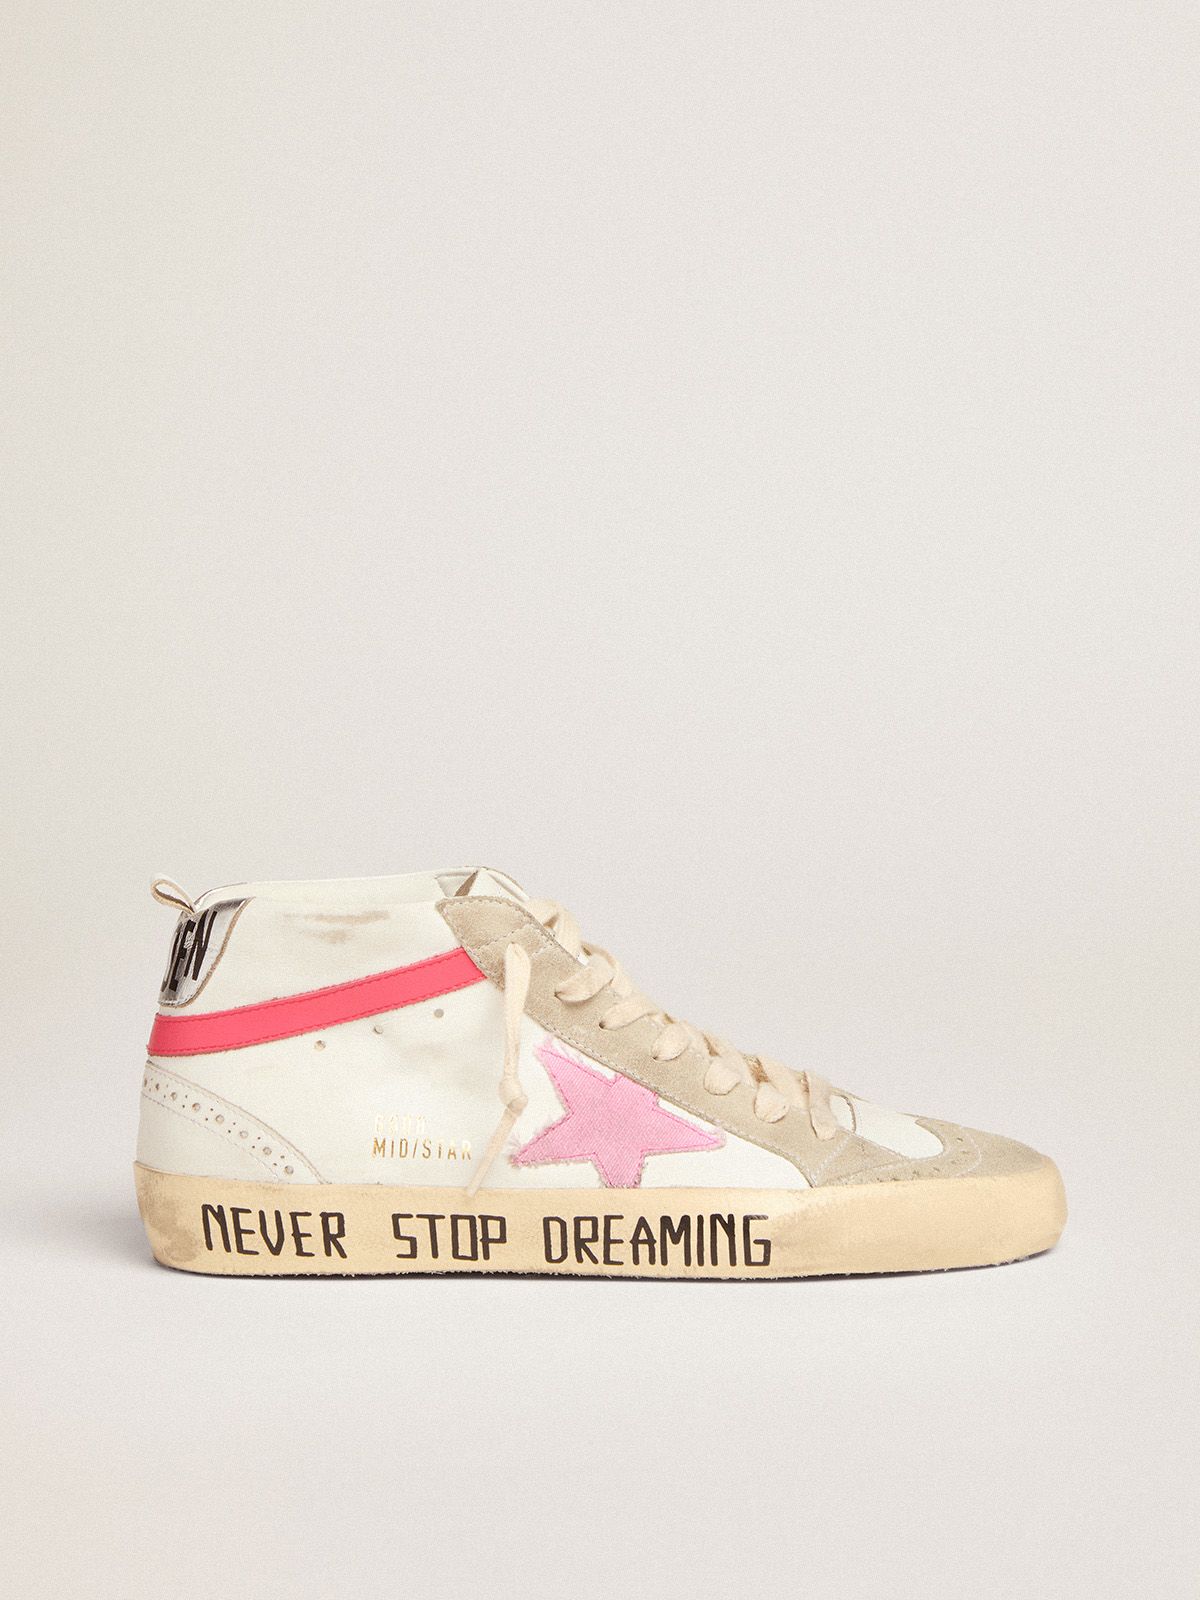 Golden Goose Sneakers Uomo Mid Star sneakers in white leather with pink canvas star and black lettering on the foxing